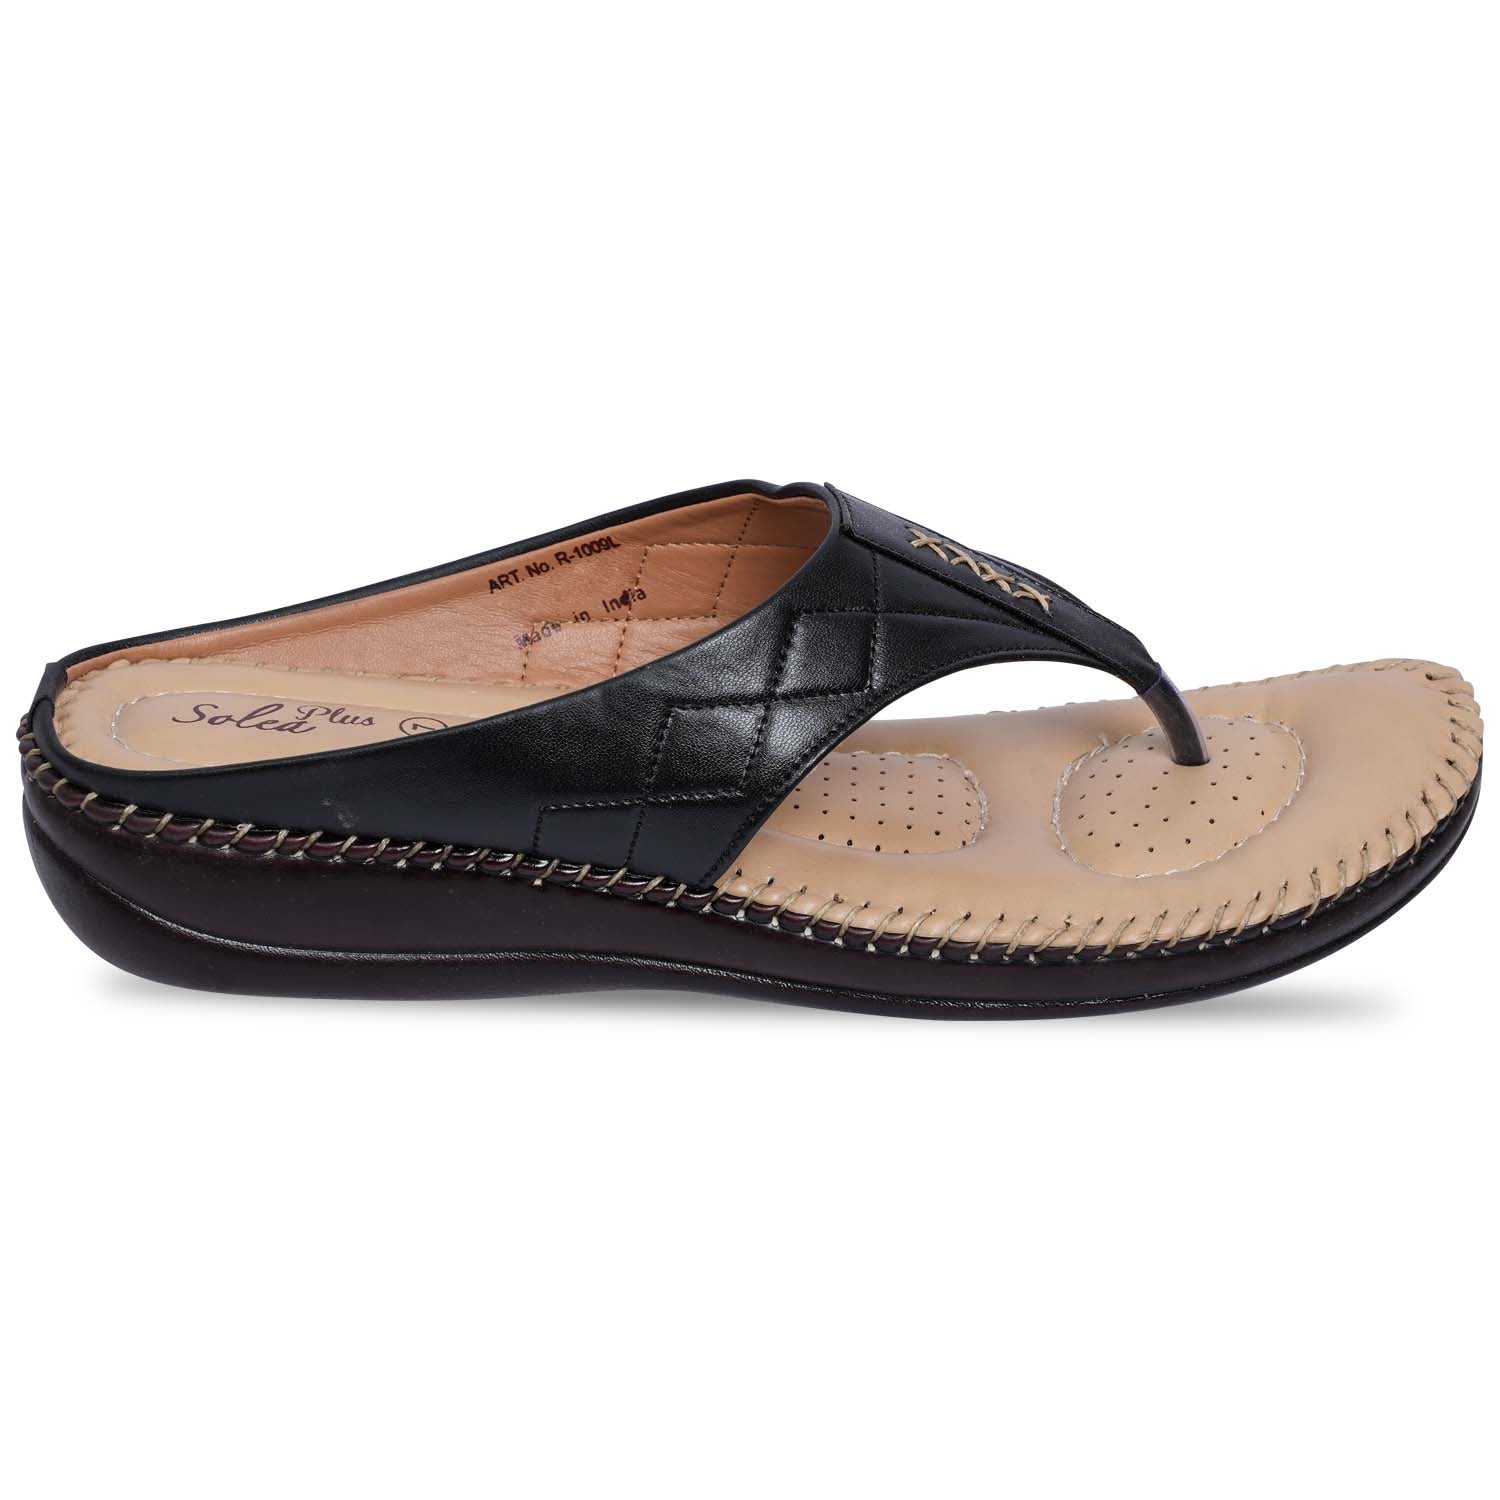 Paragon R1009L Women Sandals | Casual &amp; Formal Sandals | Stylish, Comfortable &amp; Durable | For Daily &amp; Occasion Wear